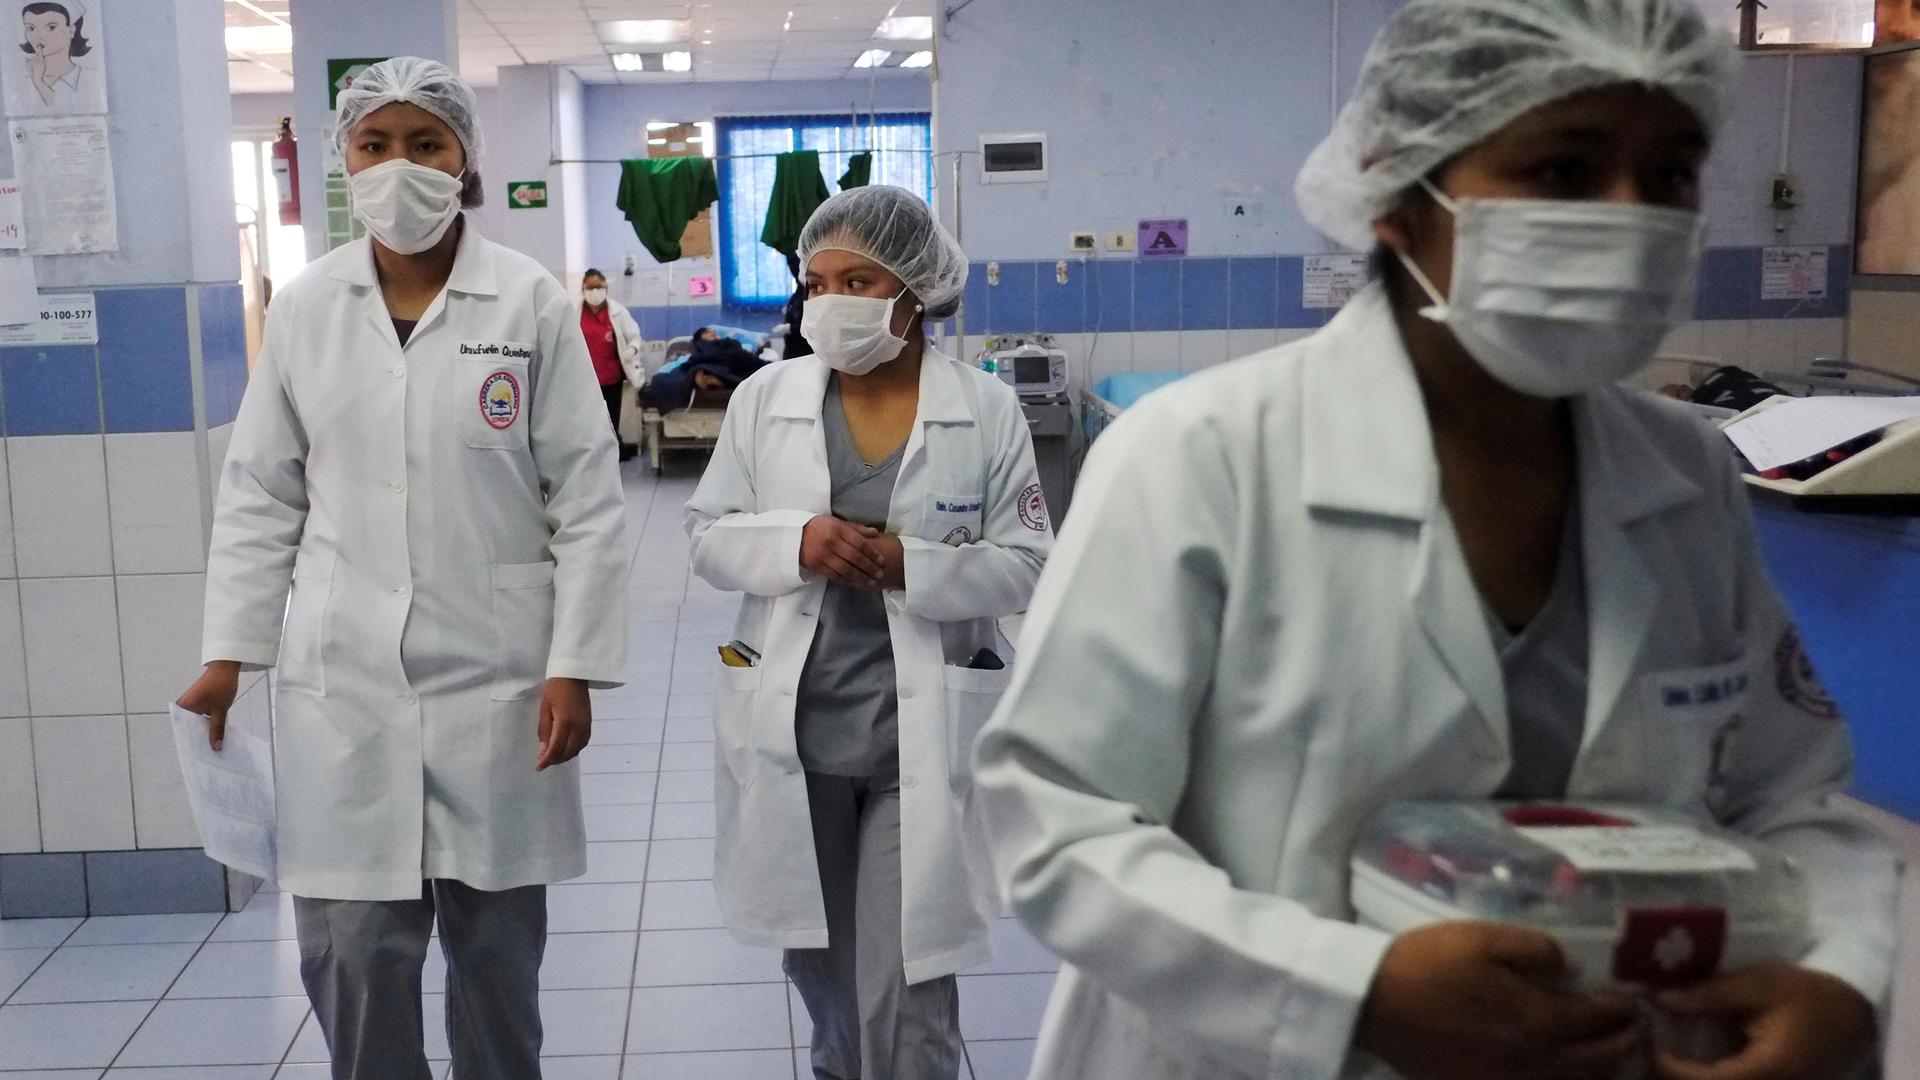 Three nurses are shown wearing white coats and hair coverings and walking in a hospital hallway.